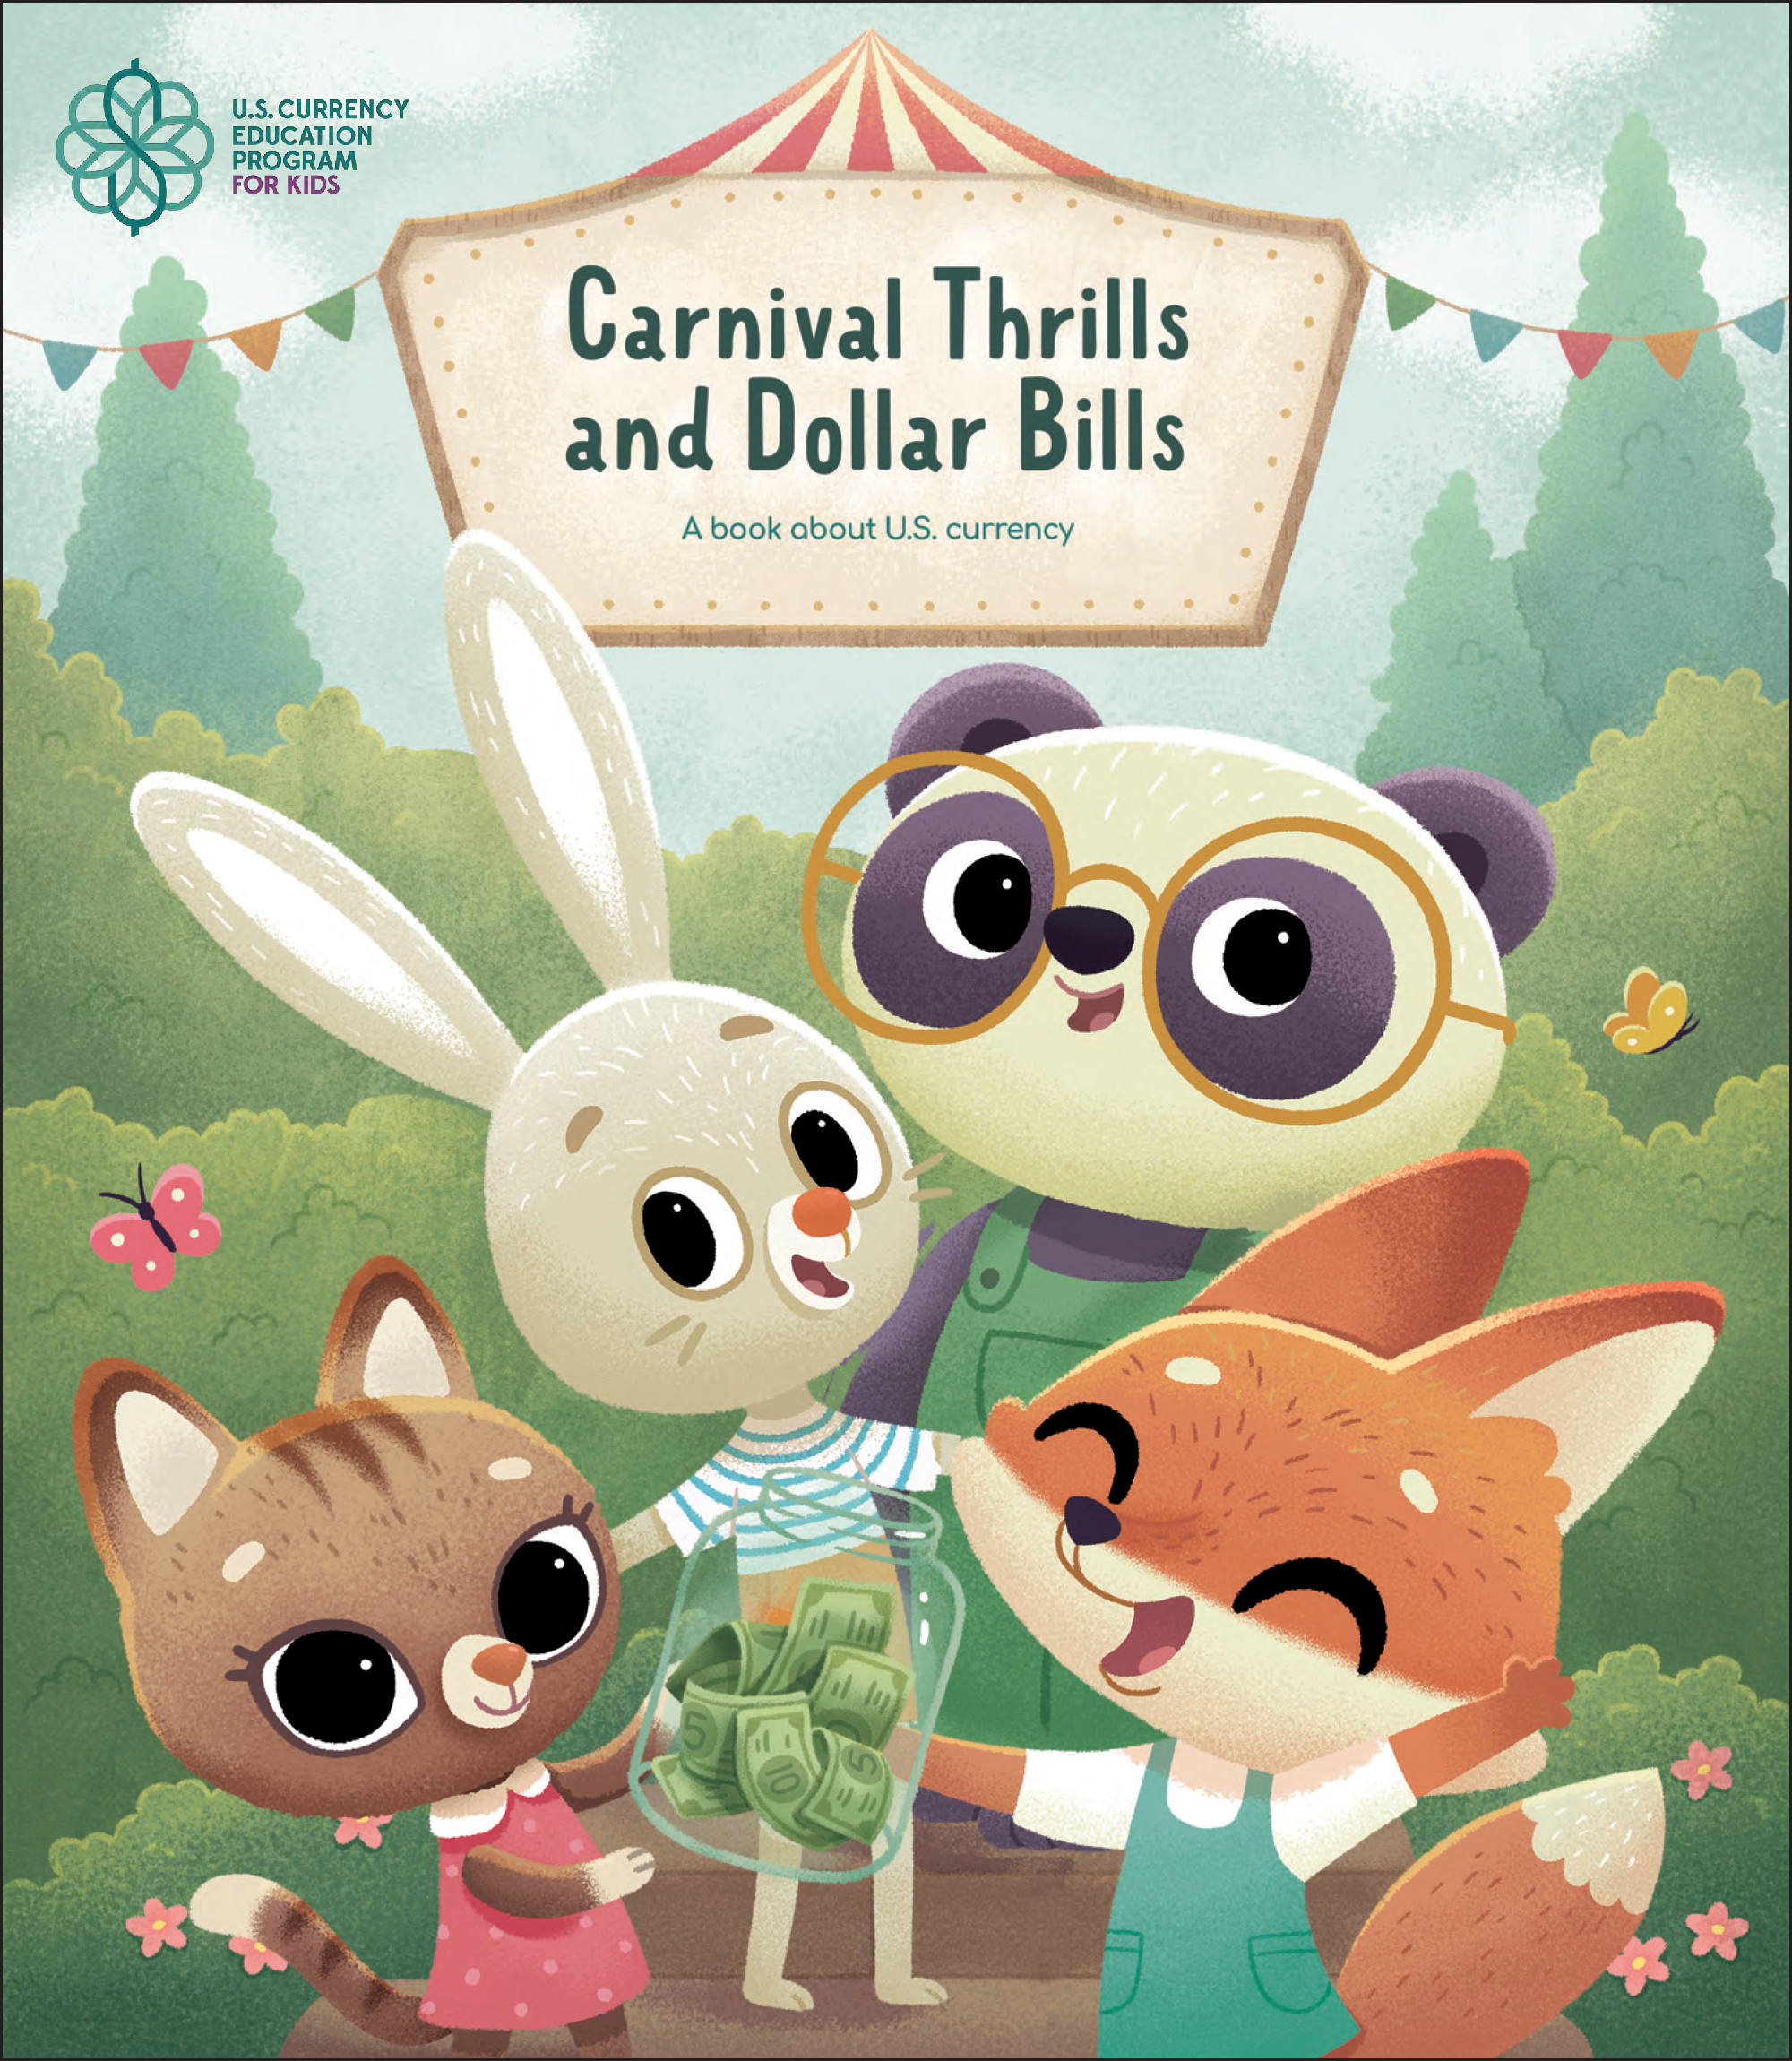 Cover of the Carnival Thrills and Dollar Bills book featuring book characters.